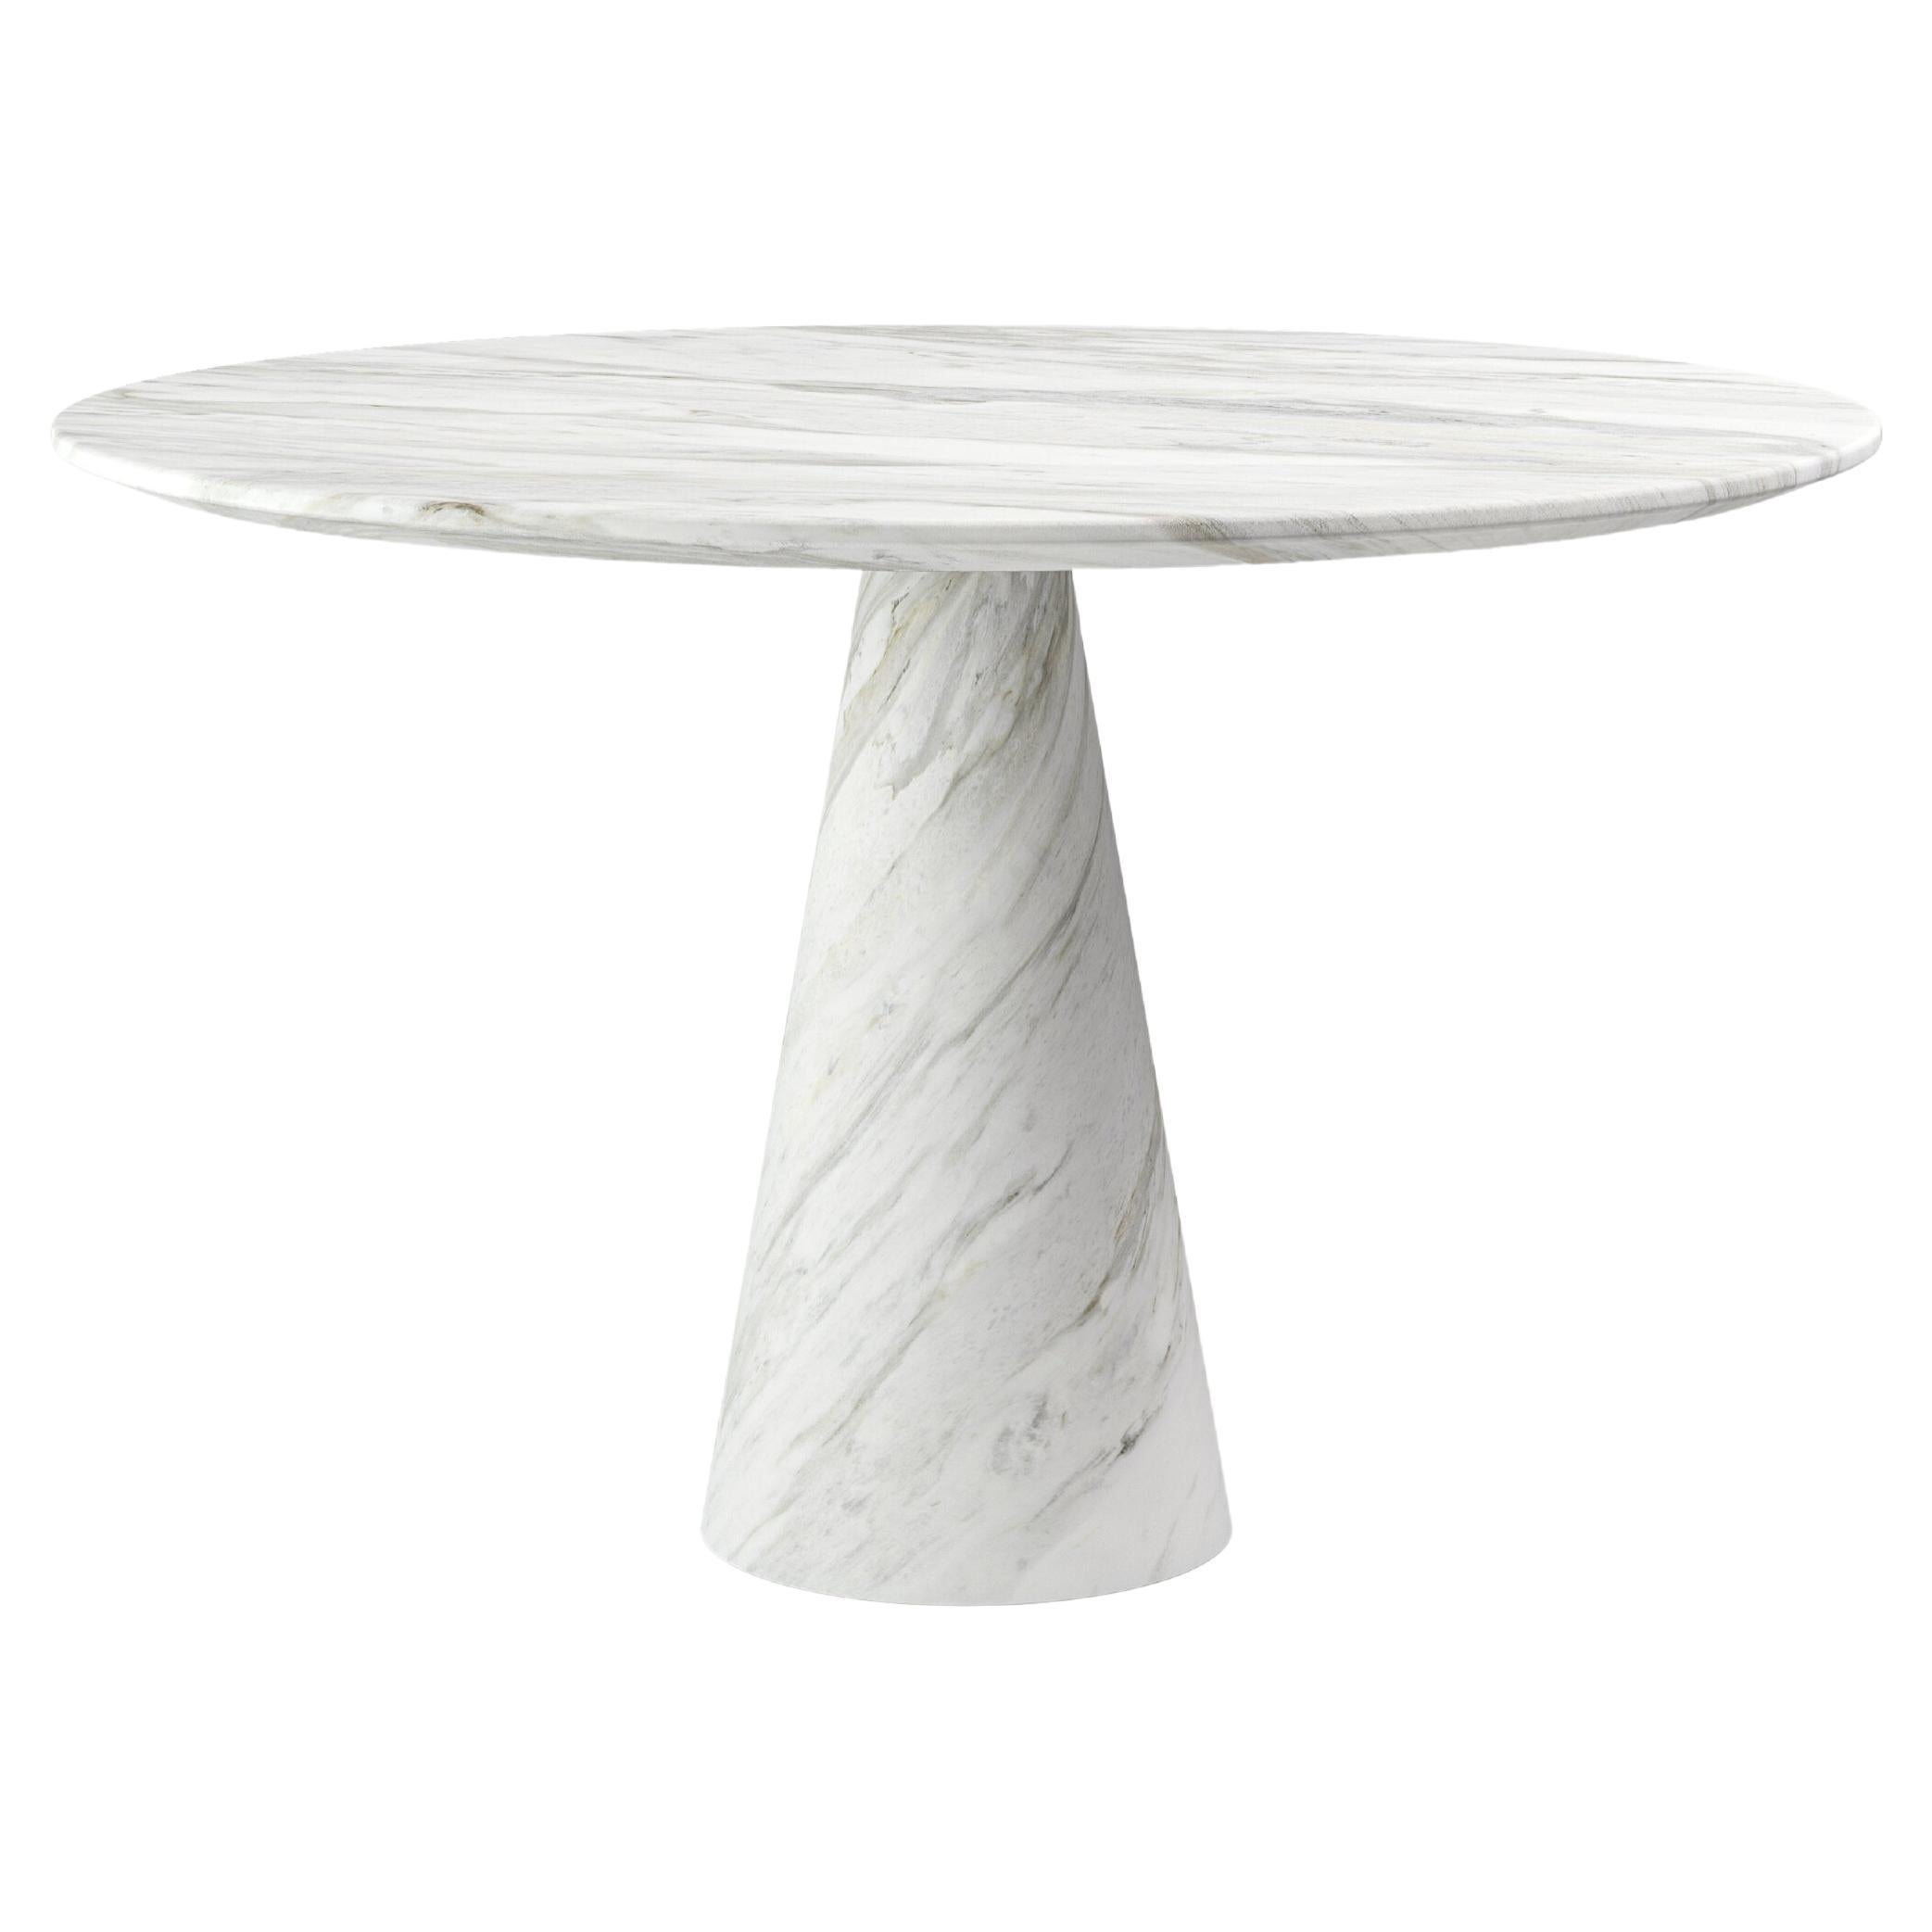 FORM(LA) Cono Round Dining Table 54”L x 54"W x 30”H Volakas White Marble For Sale